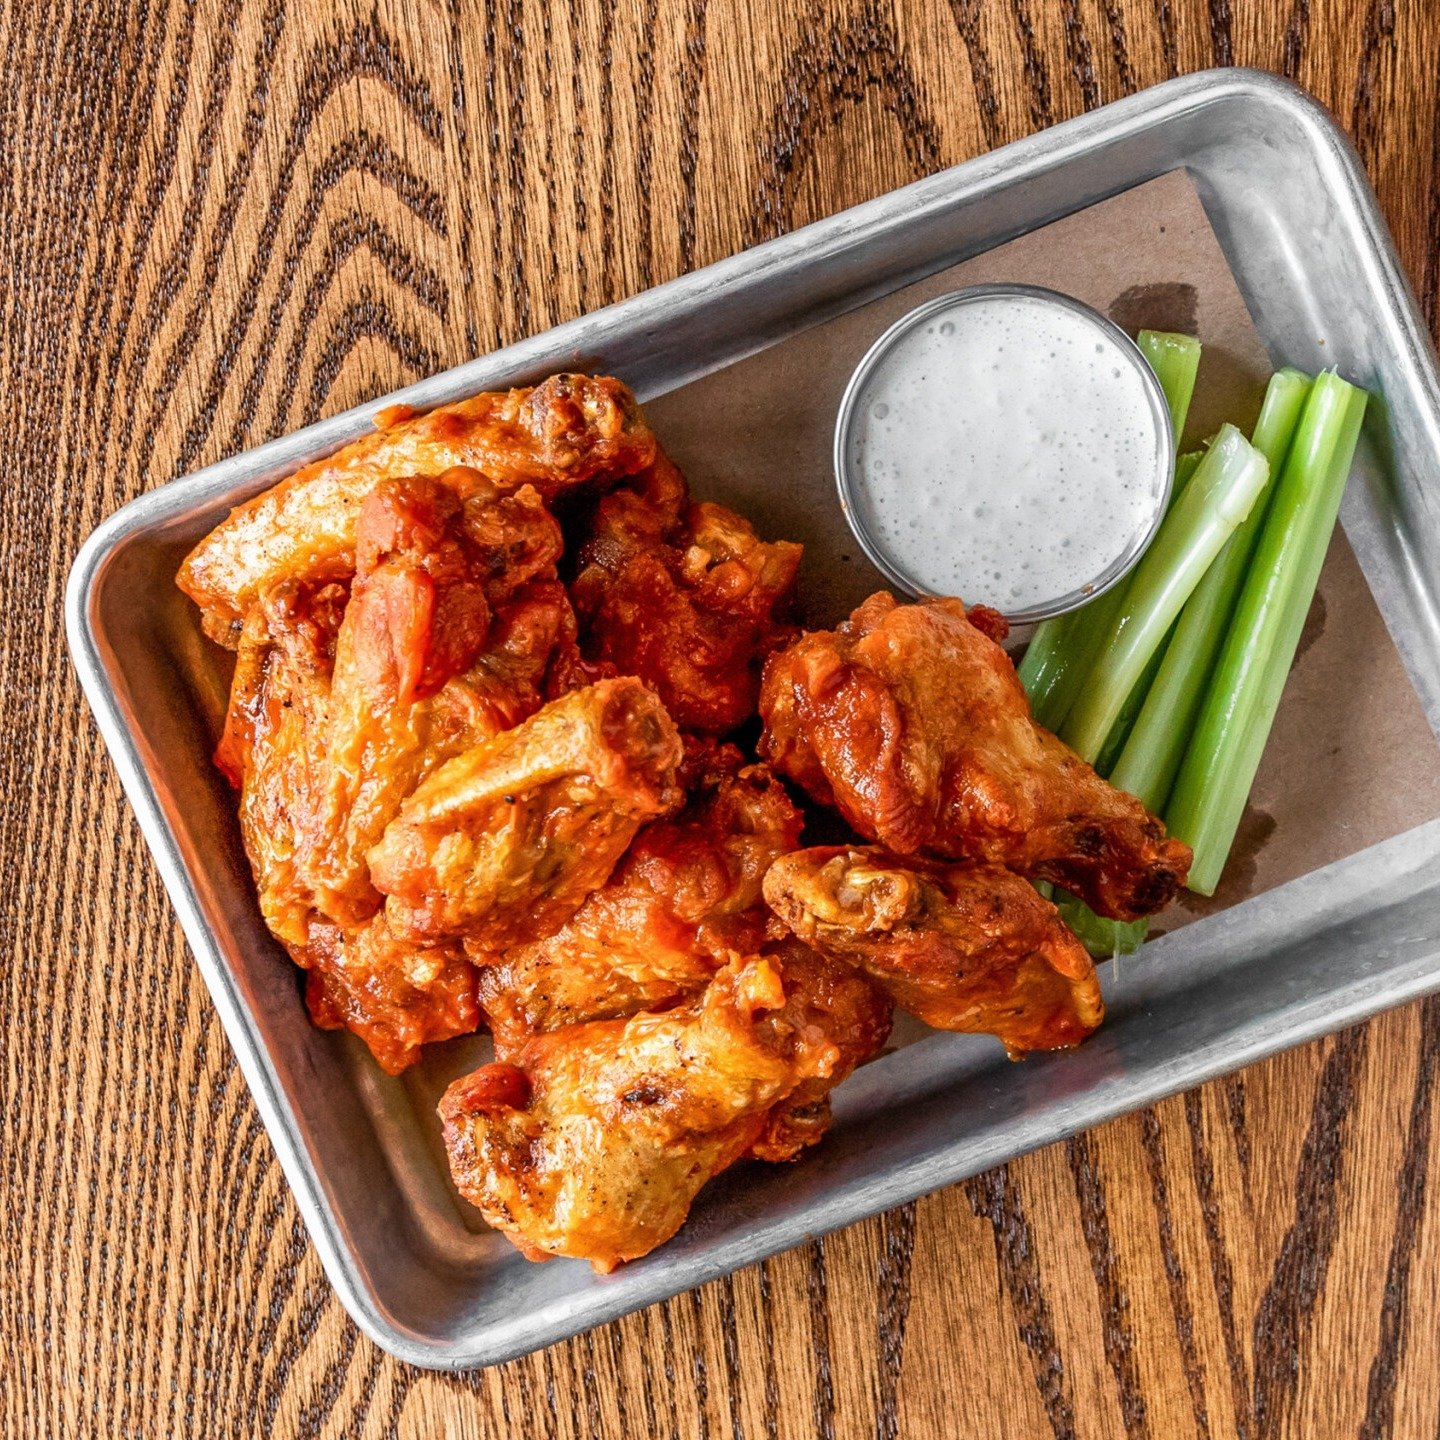 Kick off the weekend at Johnny's with some wings 😍